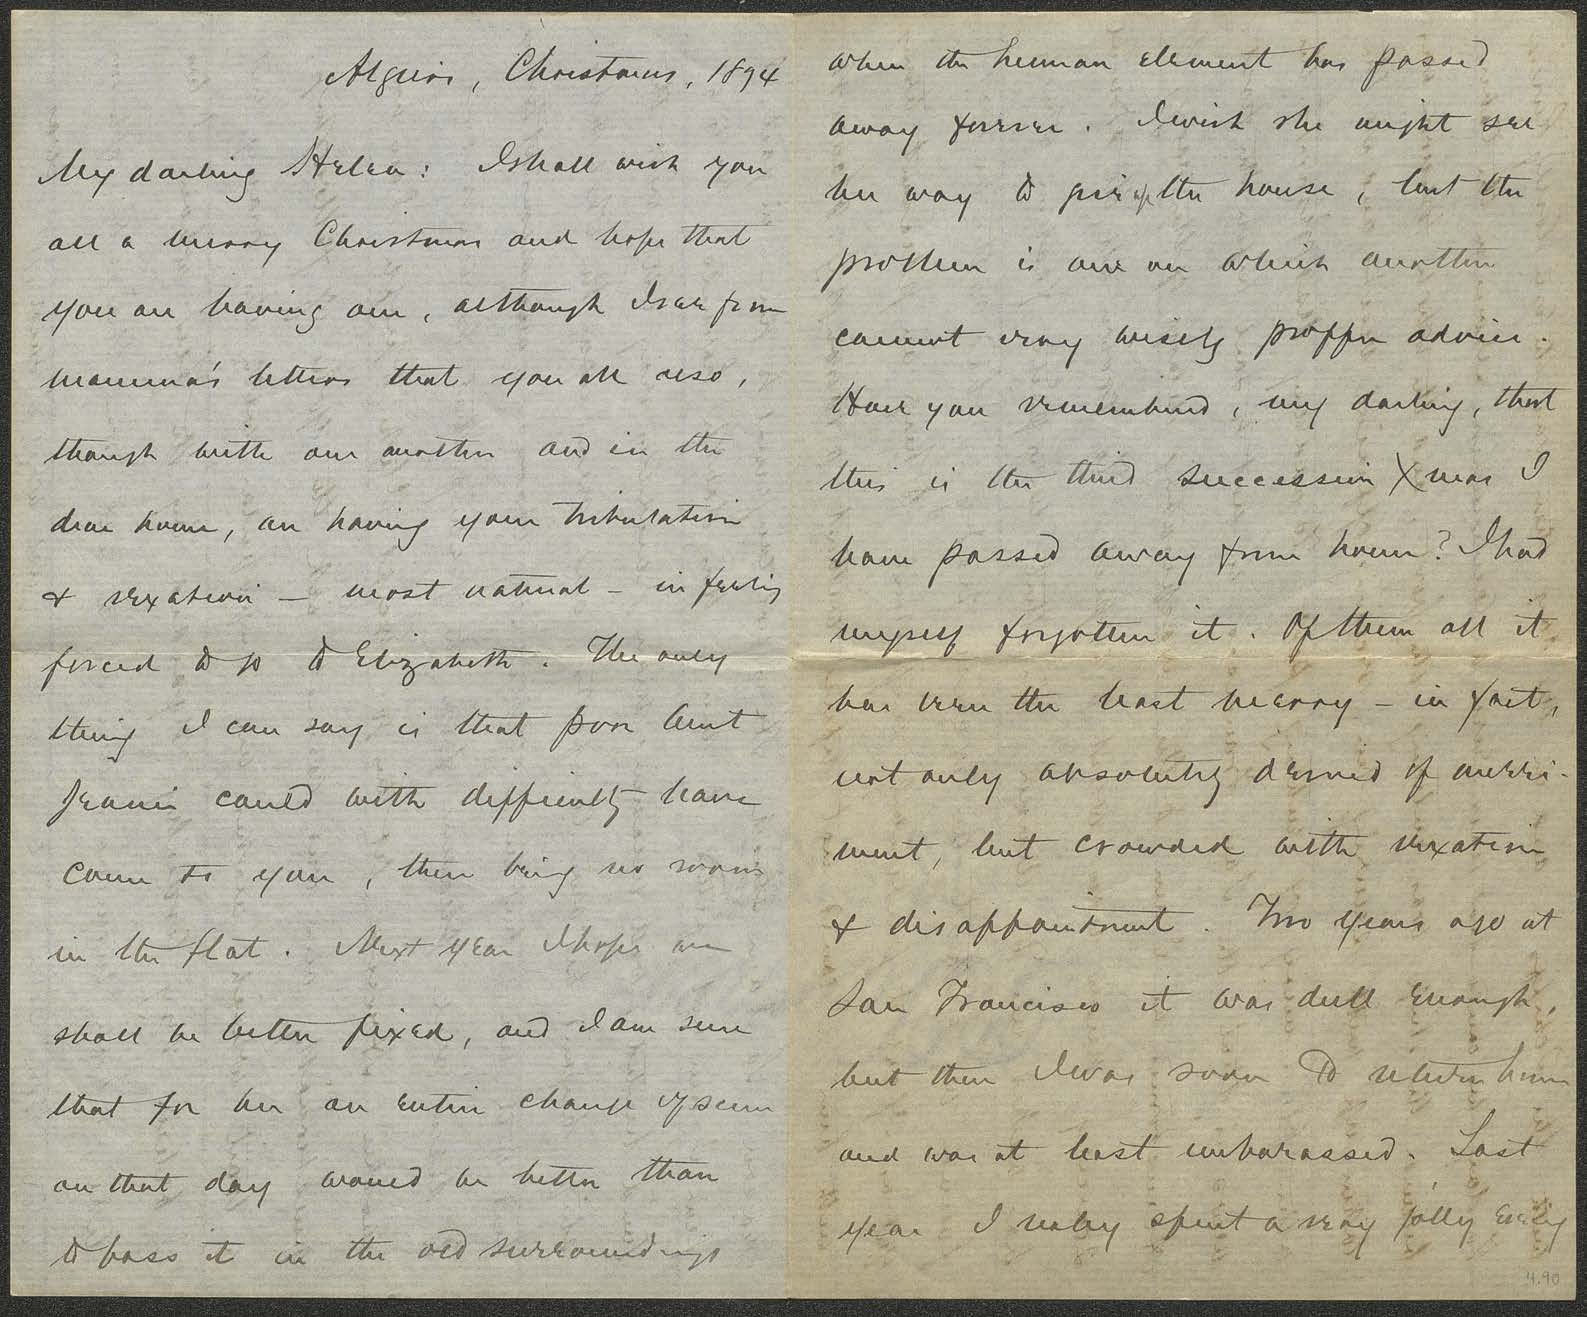 Letter to Helen E. Mahan from Alfred T. Mahan, 1894 Dec 25